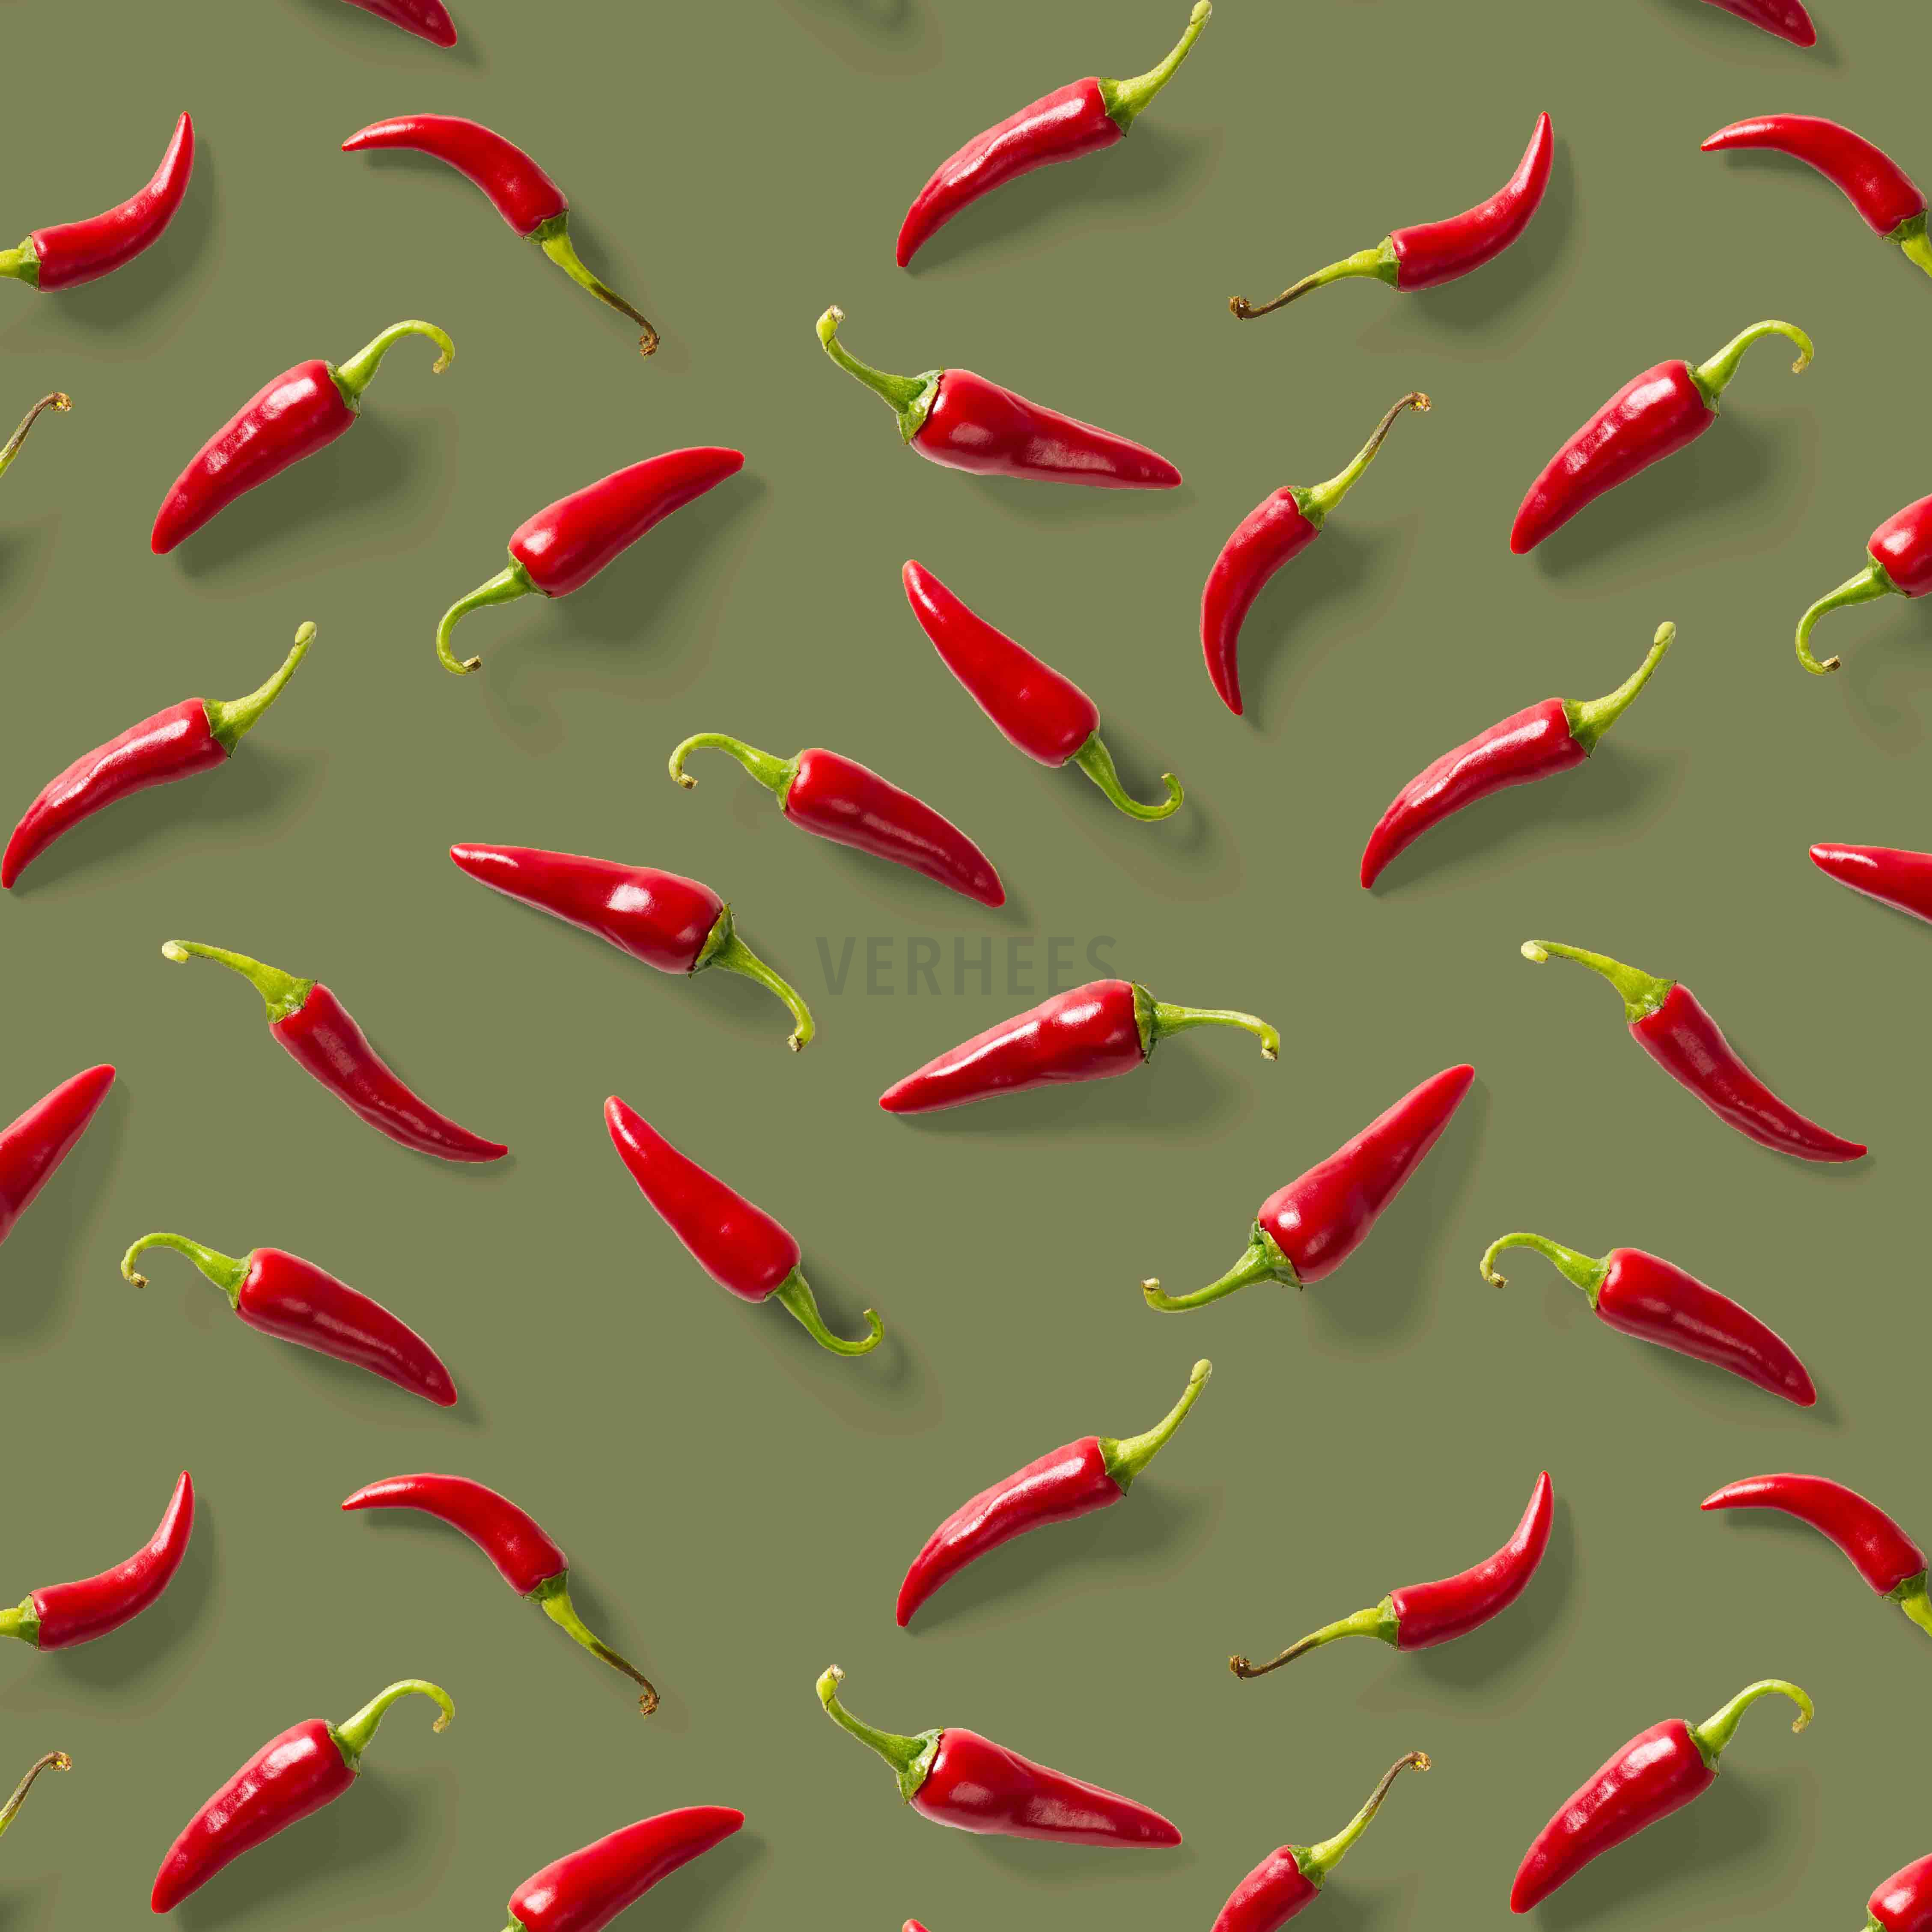 CANVAS DIGITAL PEPPERS PICKLE (high resolution)